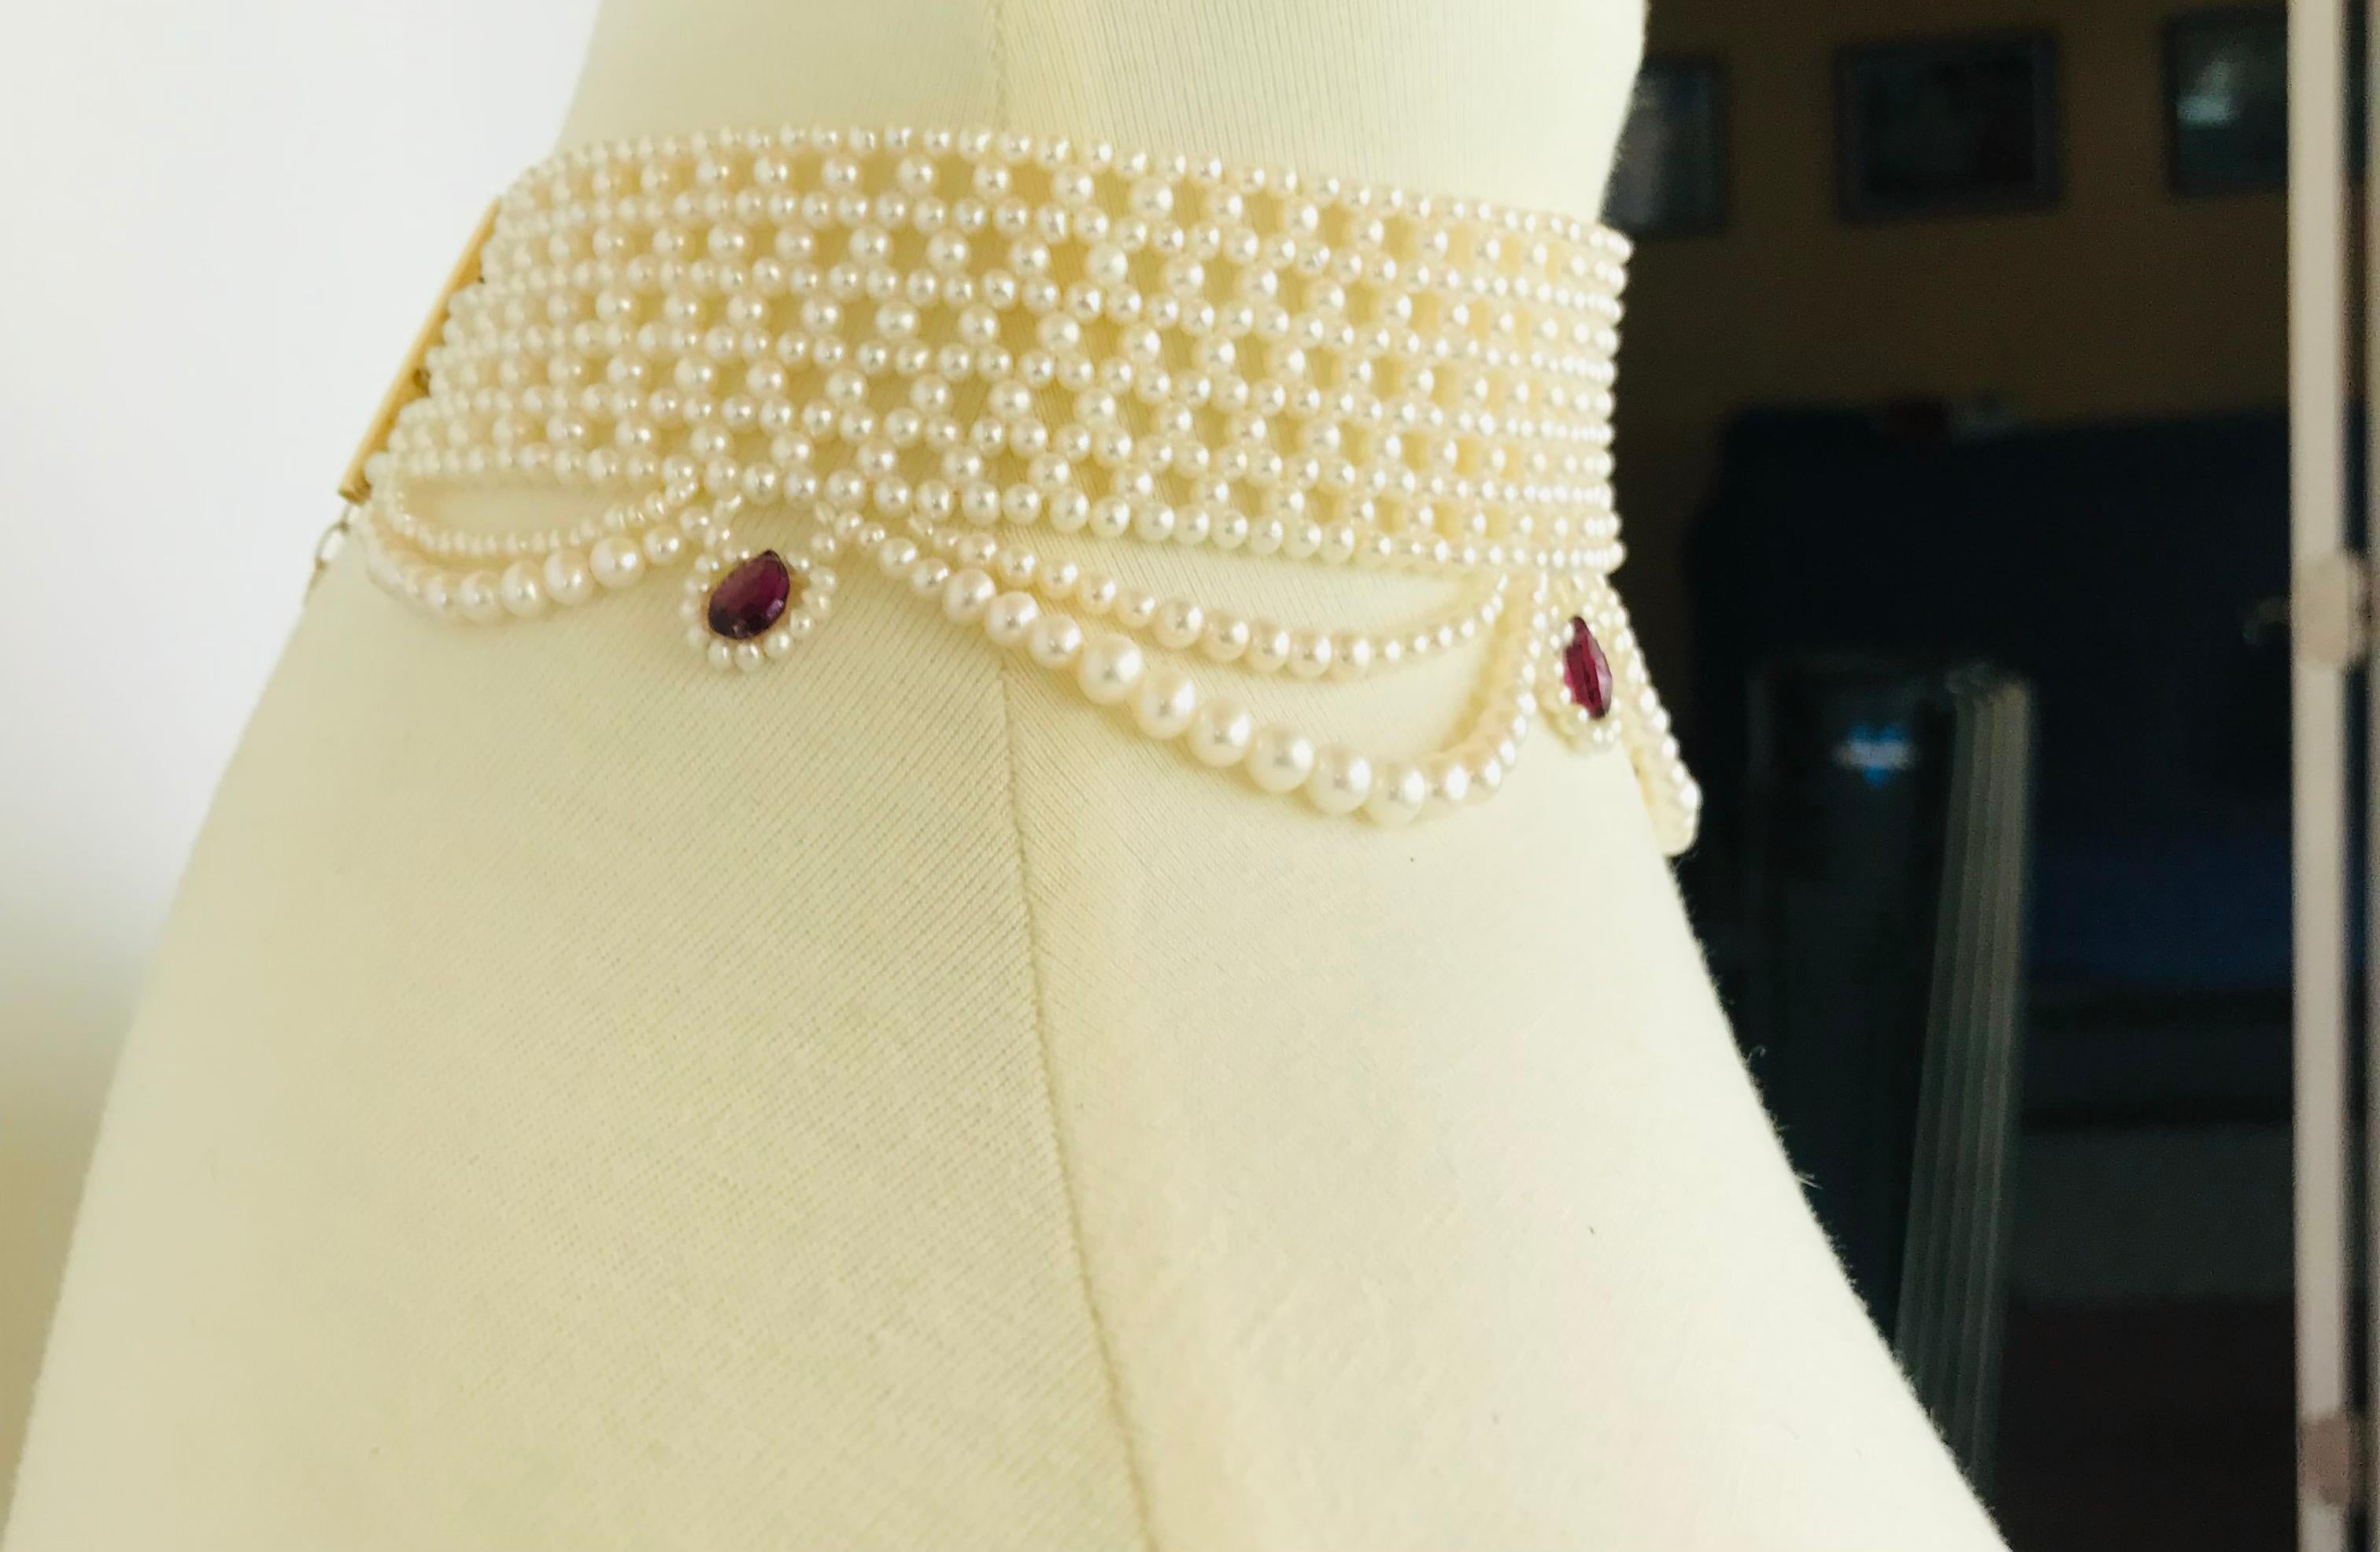 Marina J Woven Pearl Choker with Pearl Drapes, Garnet Briolettes and 14 K Gold 4